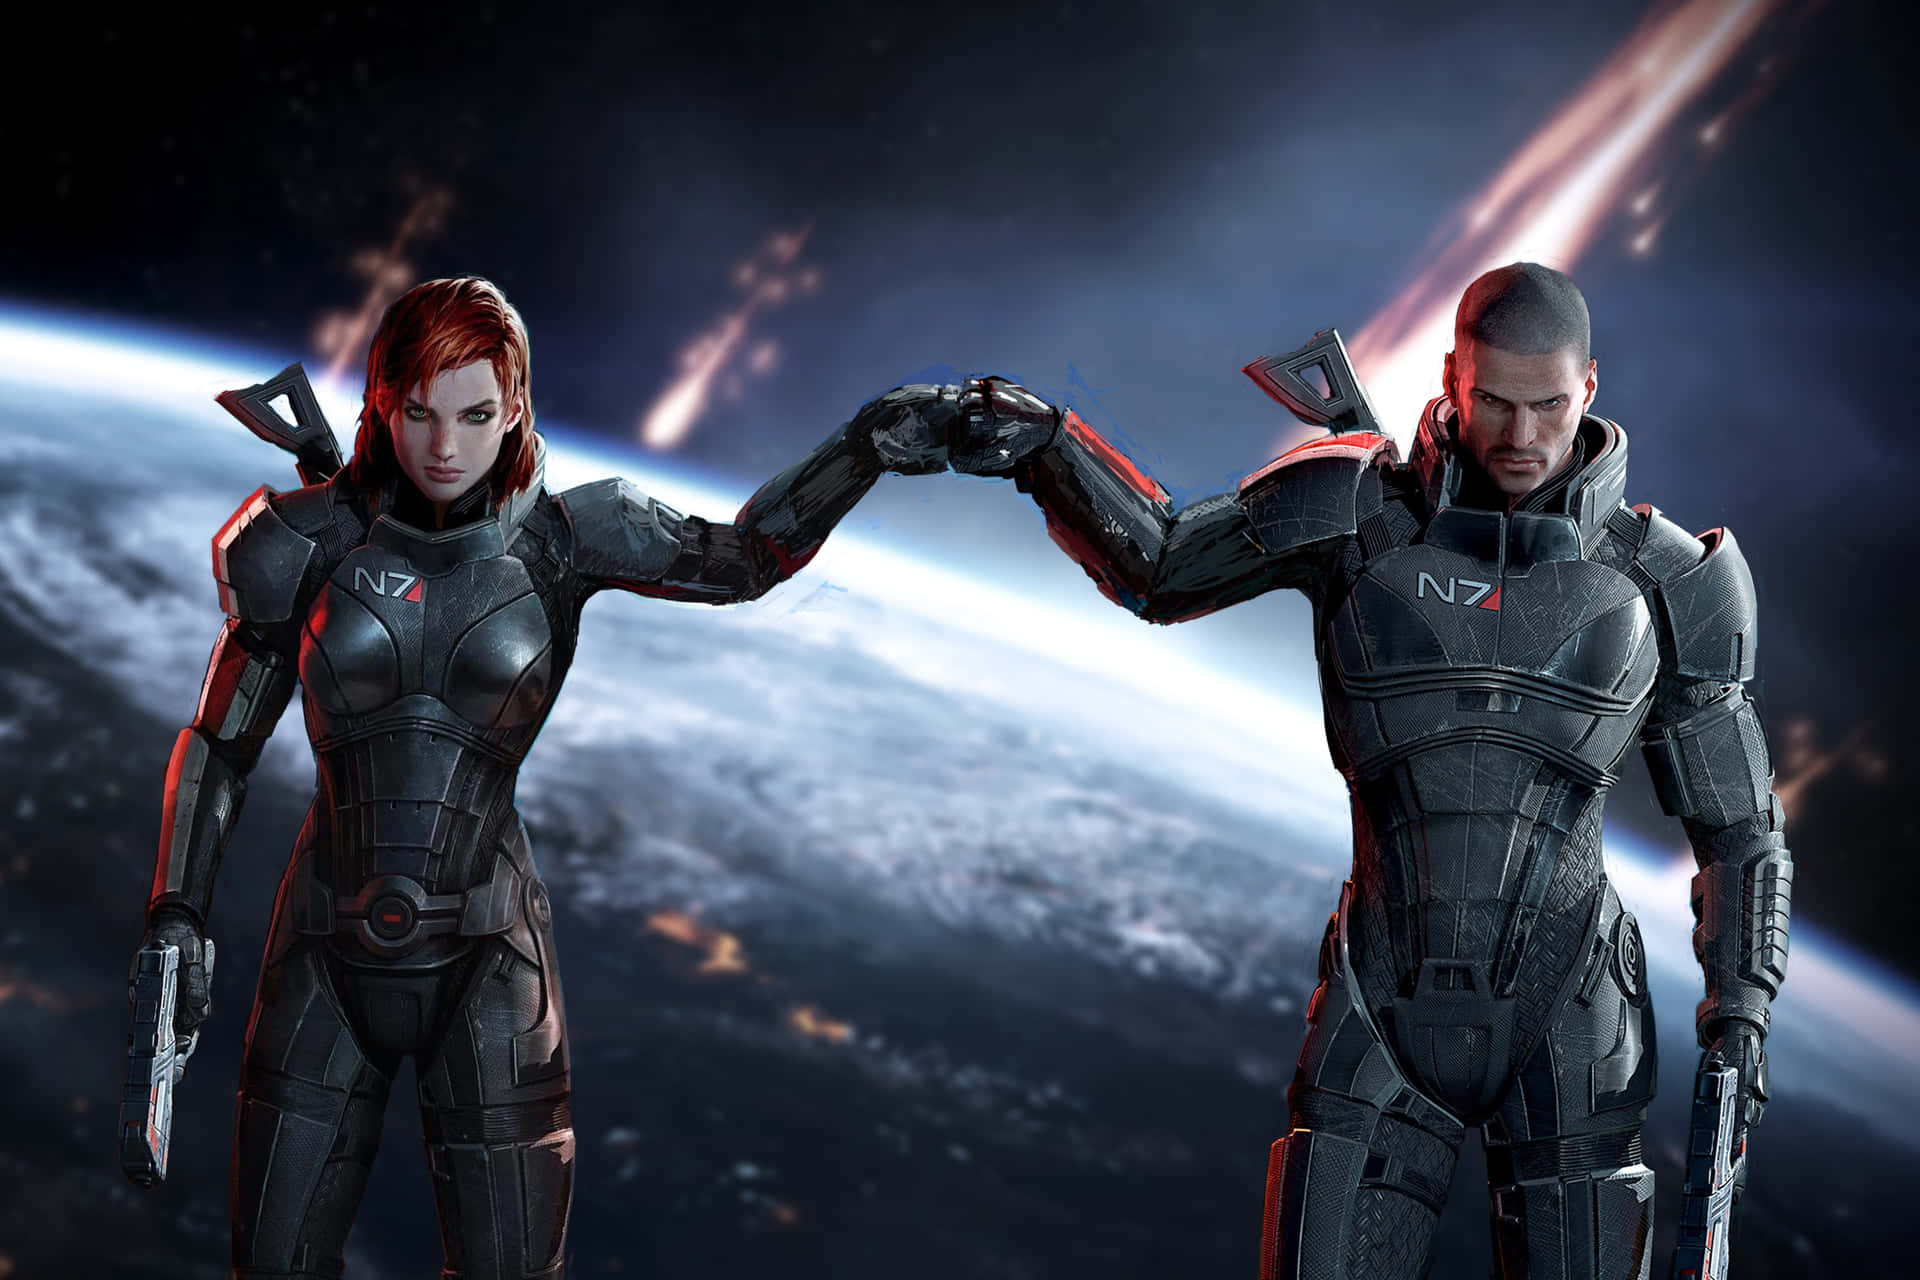 Femshep in Action: Defending the Galaxy Wallpaper